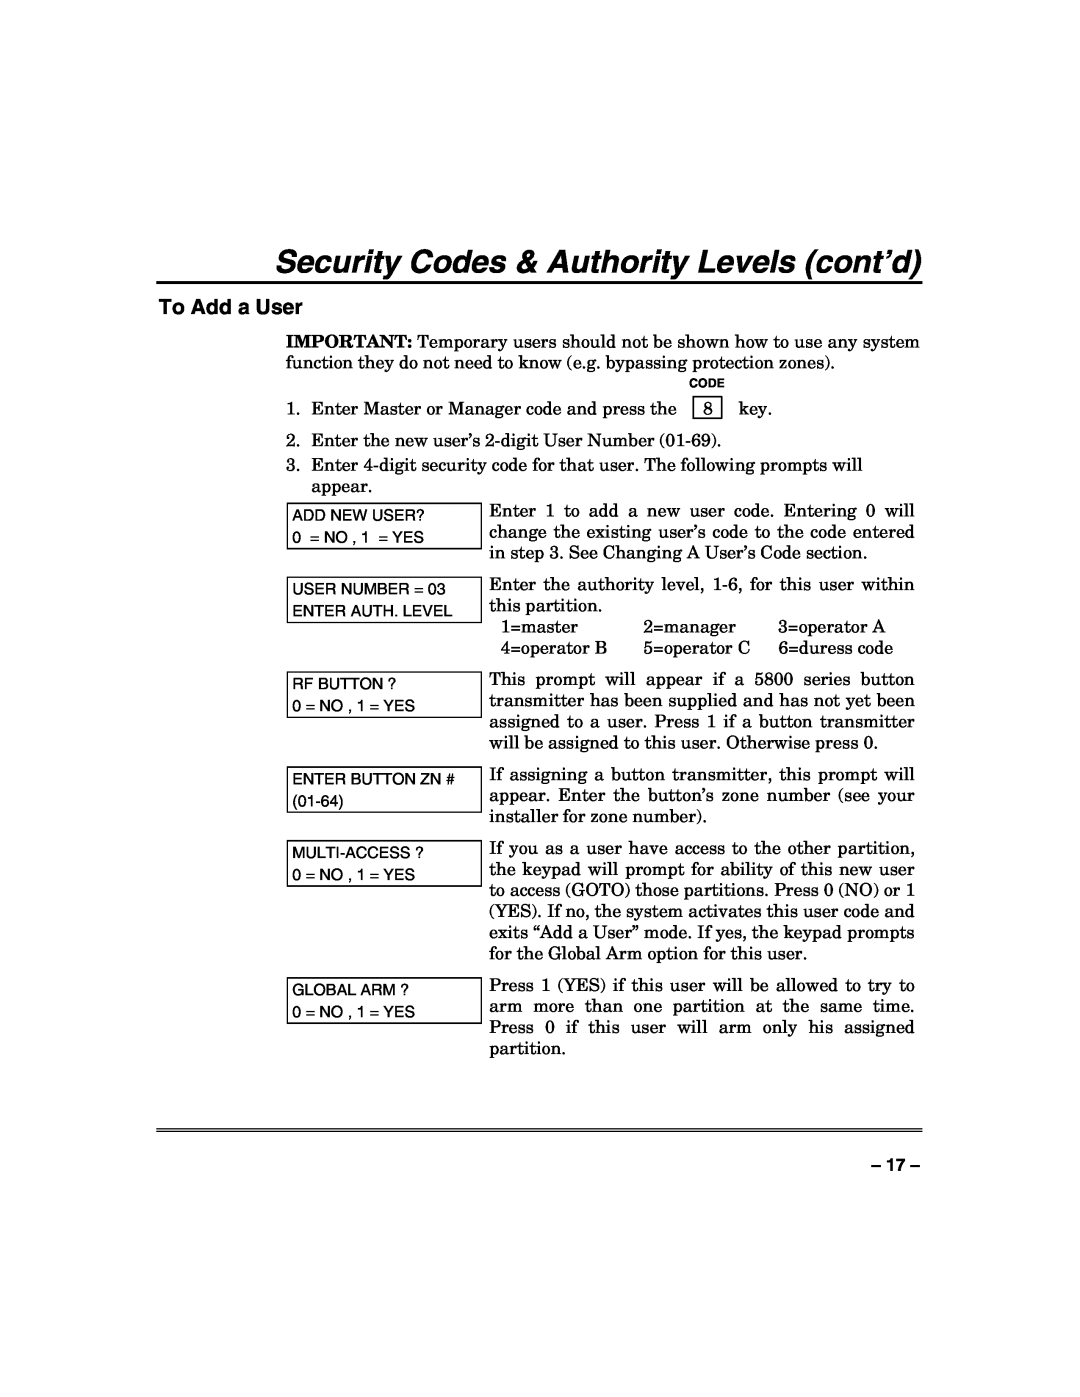 Honeywell N7003V3 manual To Add a User, Security Codes & Authority Levels cont’d 